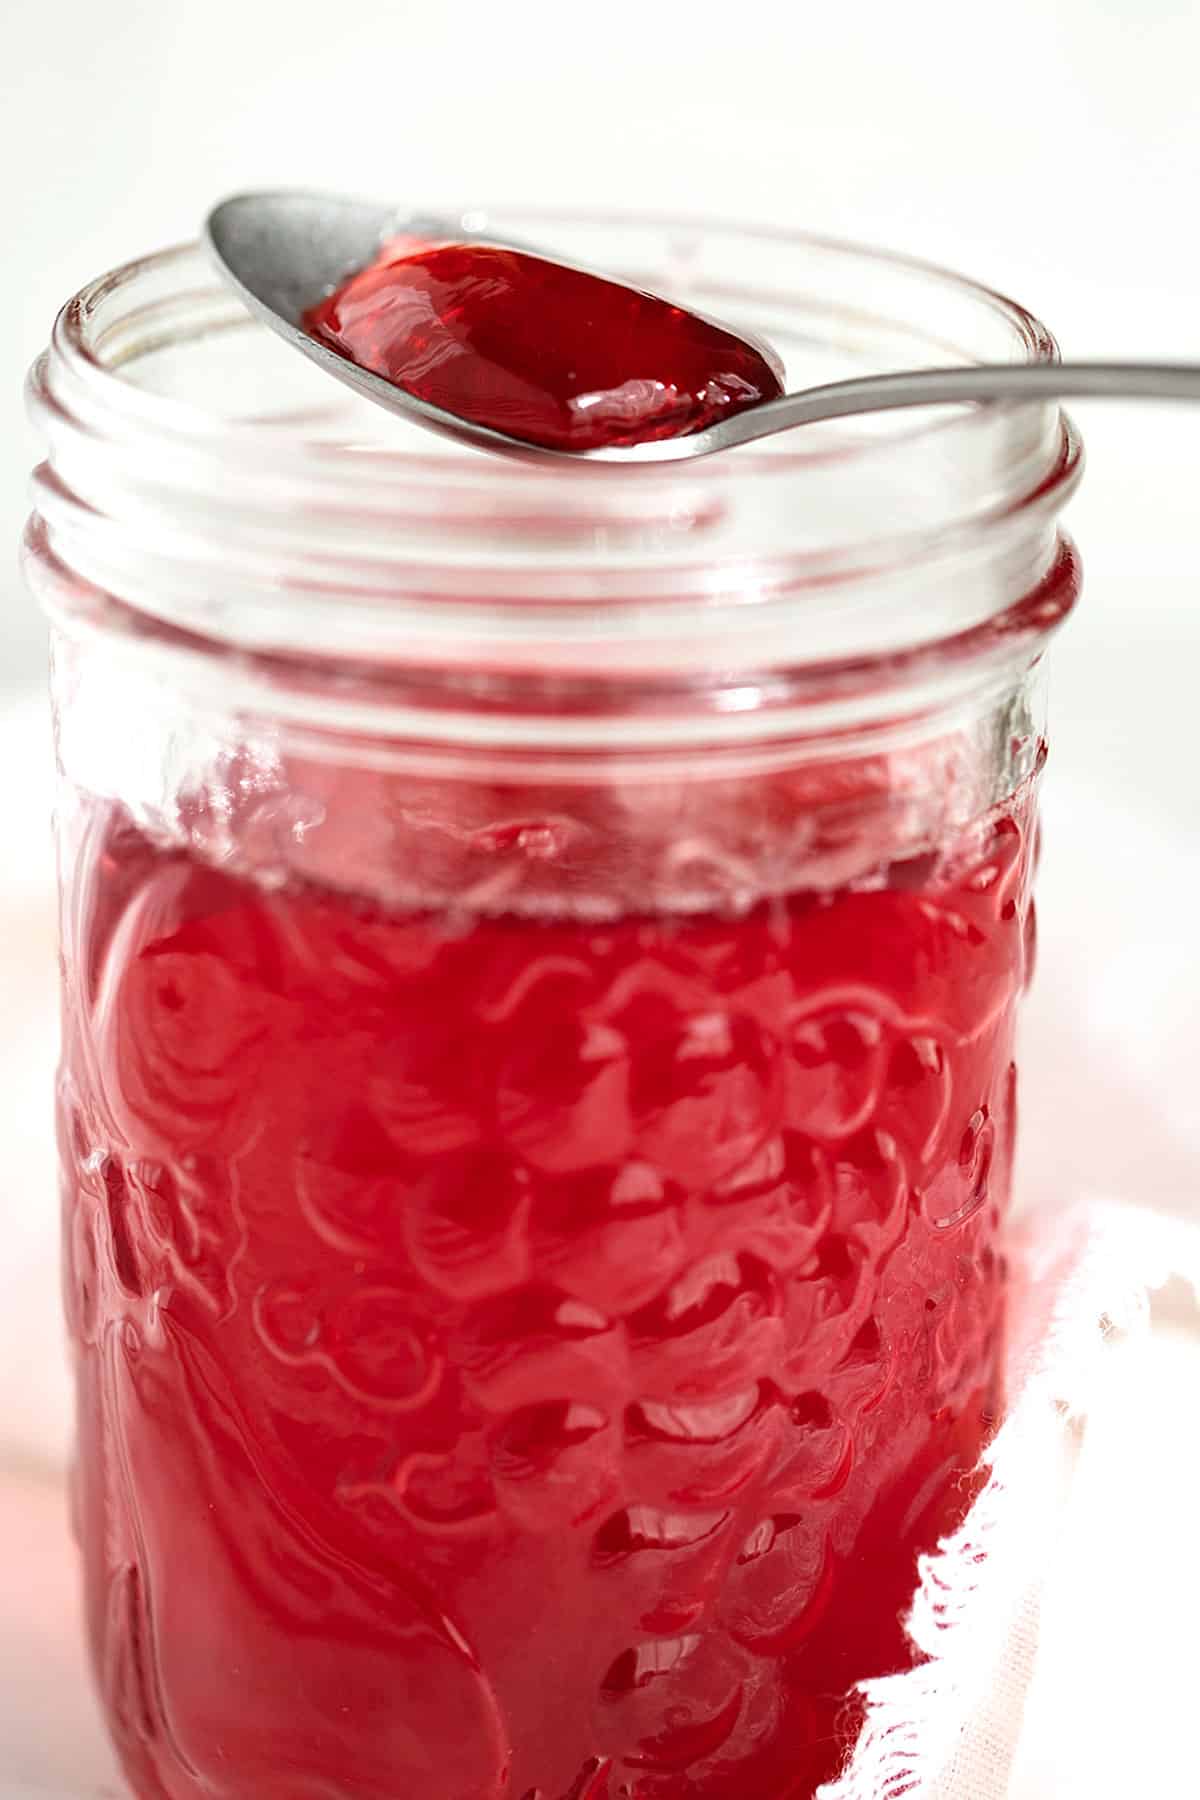 homemade crab apple jelly in jar with some on spoon